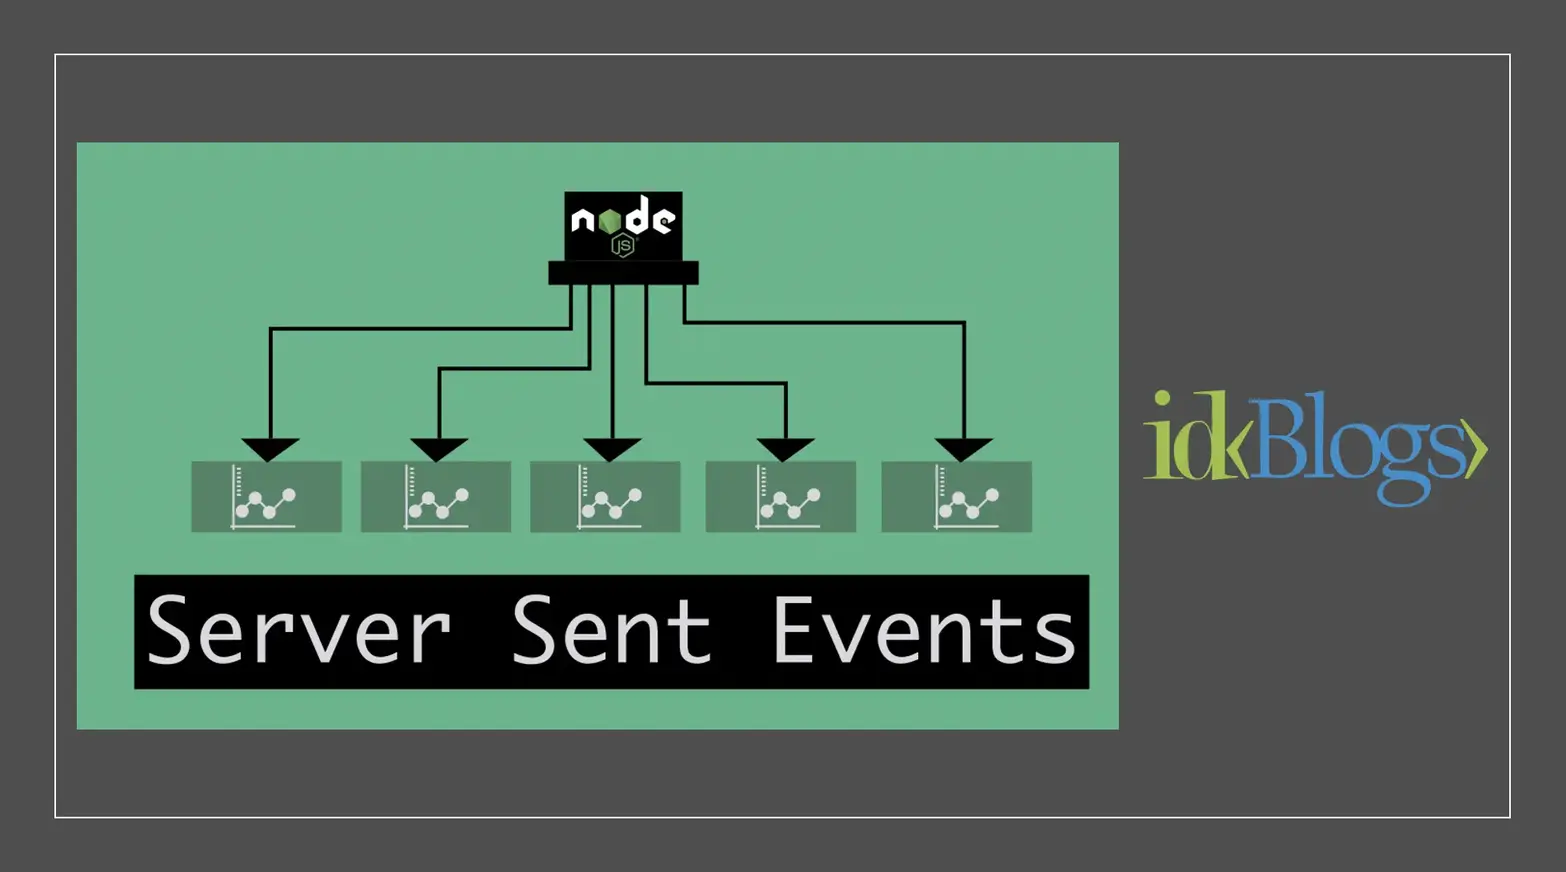 Implement Server-Sent Events in NodeJS and integrate this unidirectional event flow with React